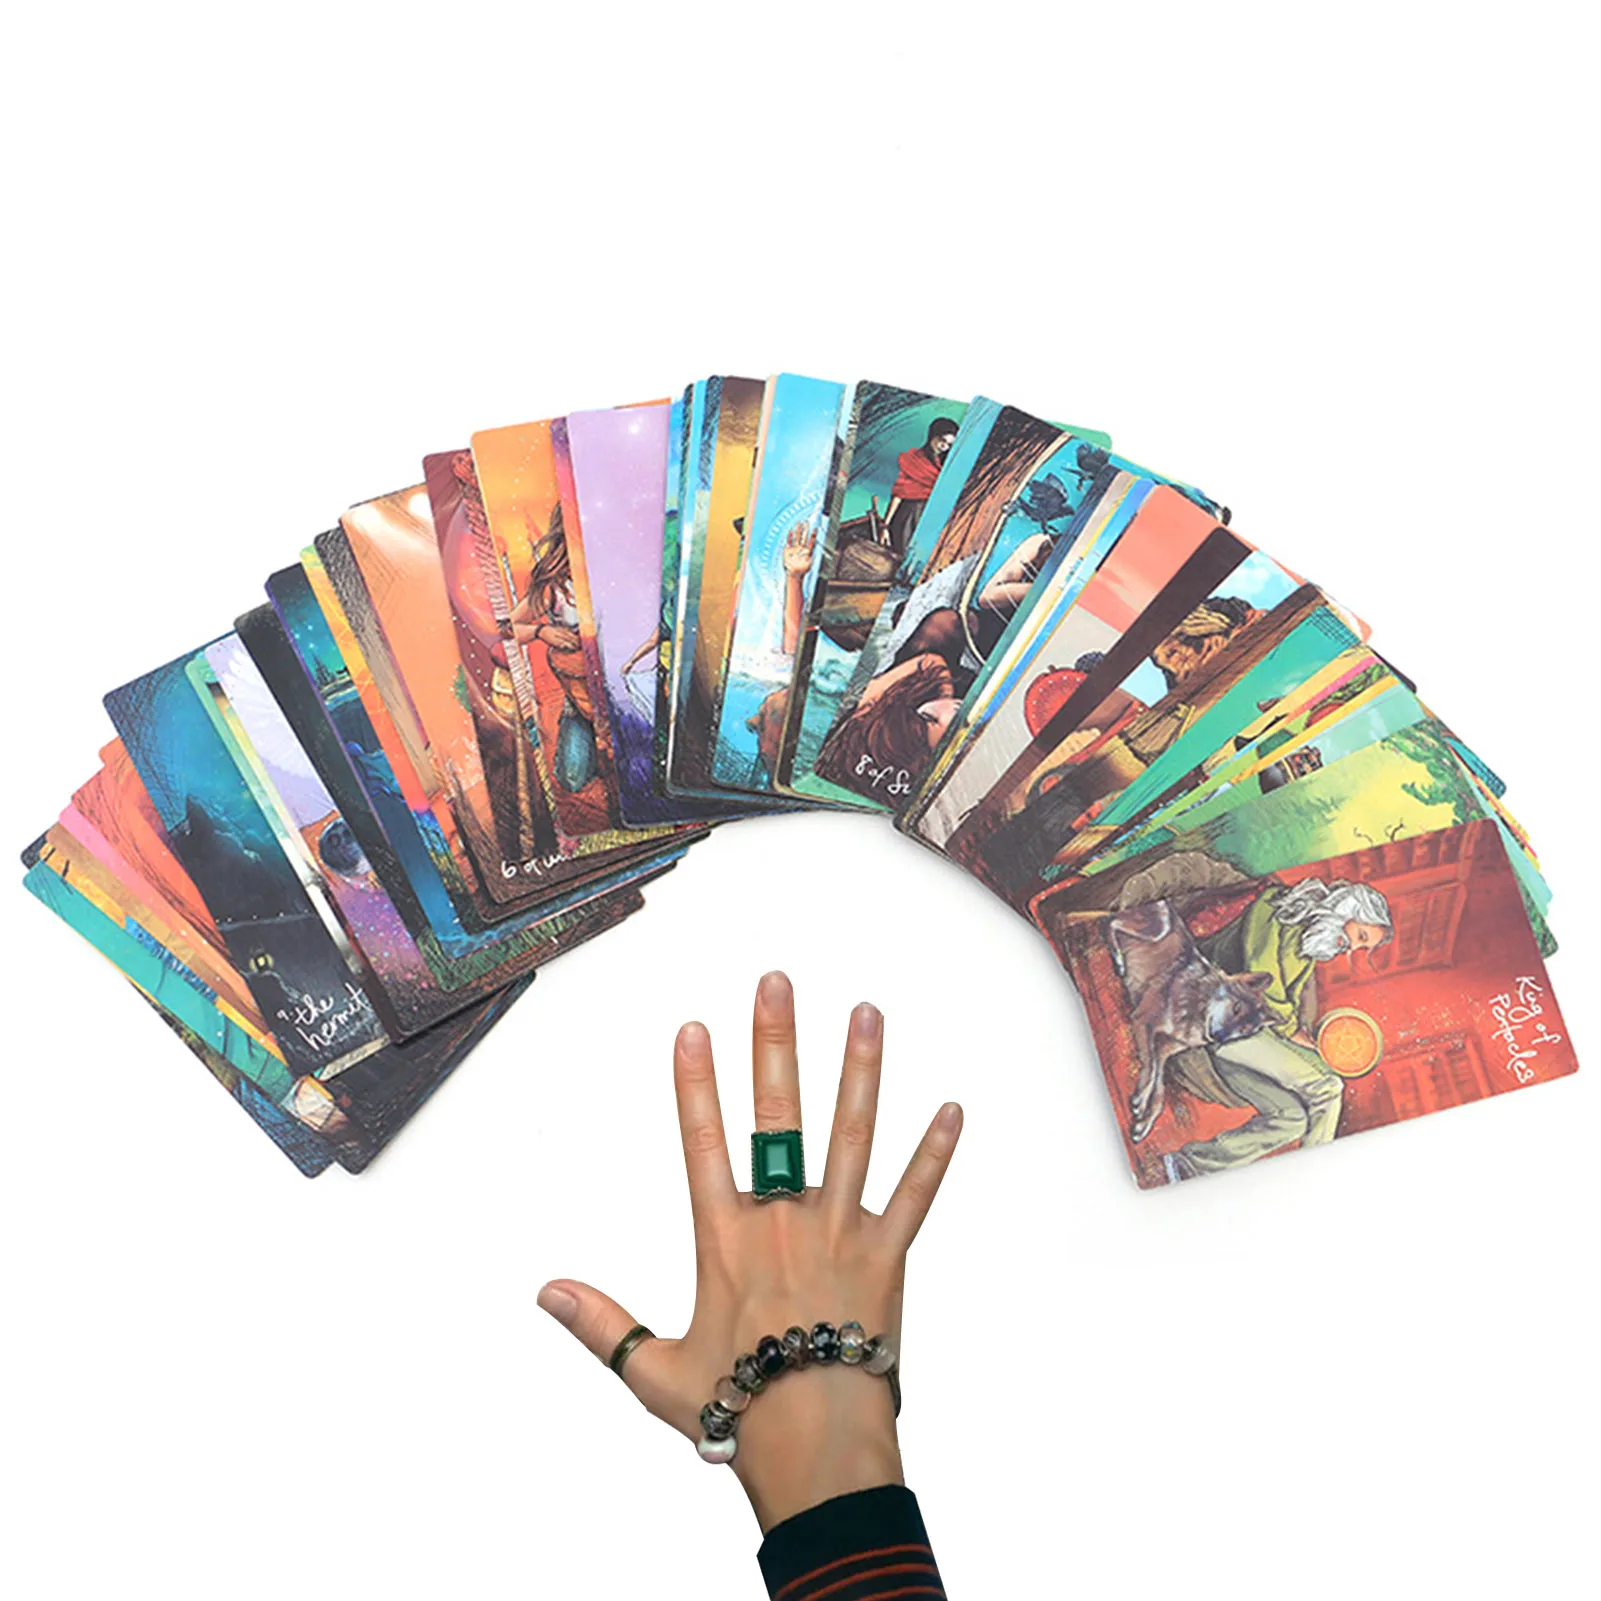 

78pcs Light Seer's Tarot Card Table Games Creative Cards Oracle Family Holiday Party Playing Card English Tarot Deck Table Game